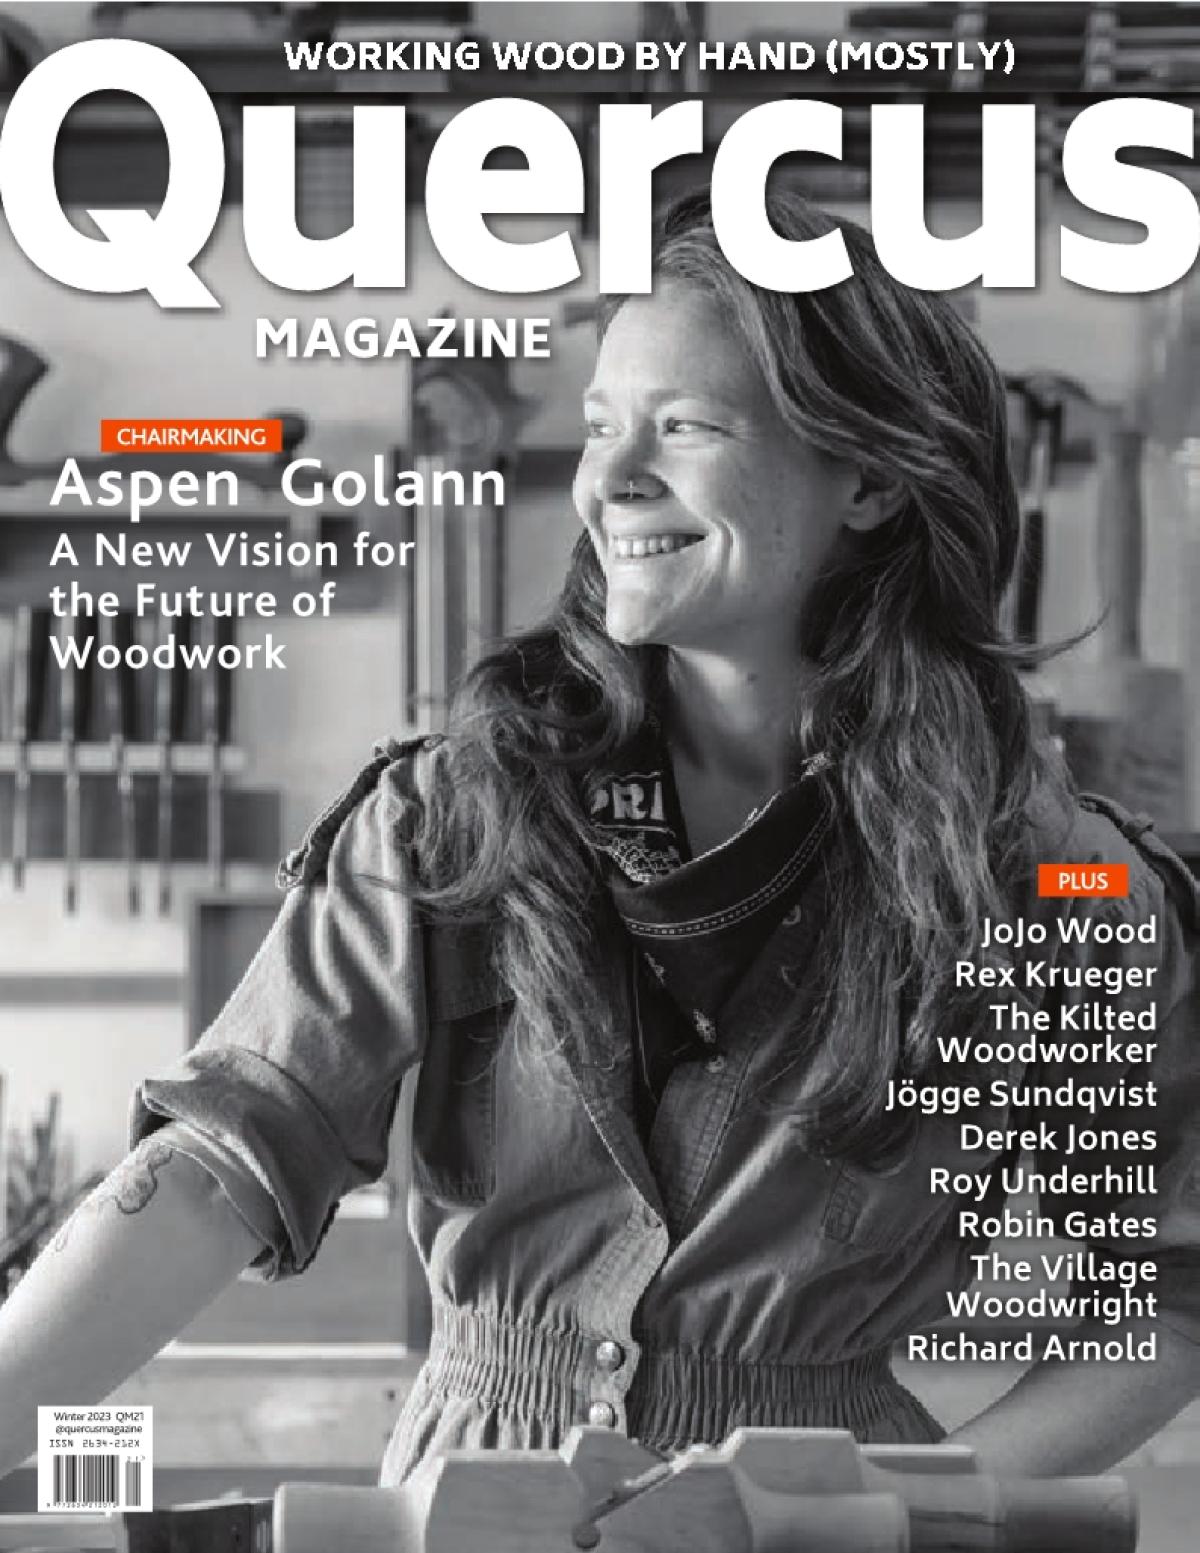 The cover of the last issue of Quercus